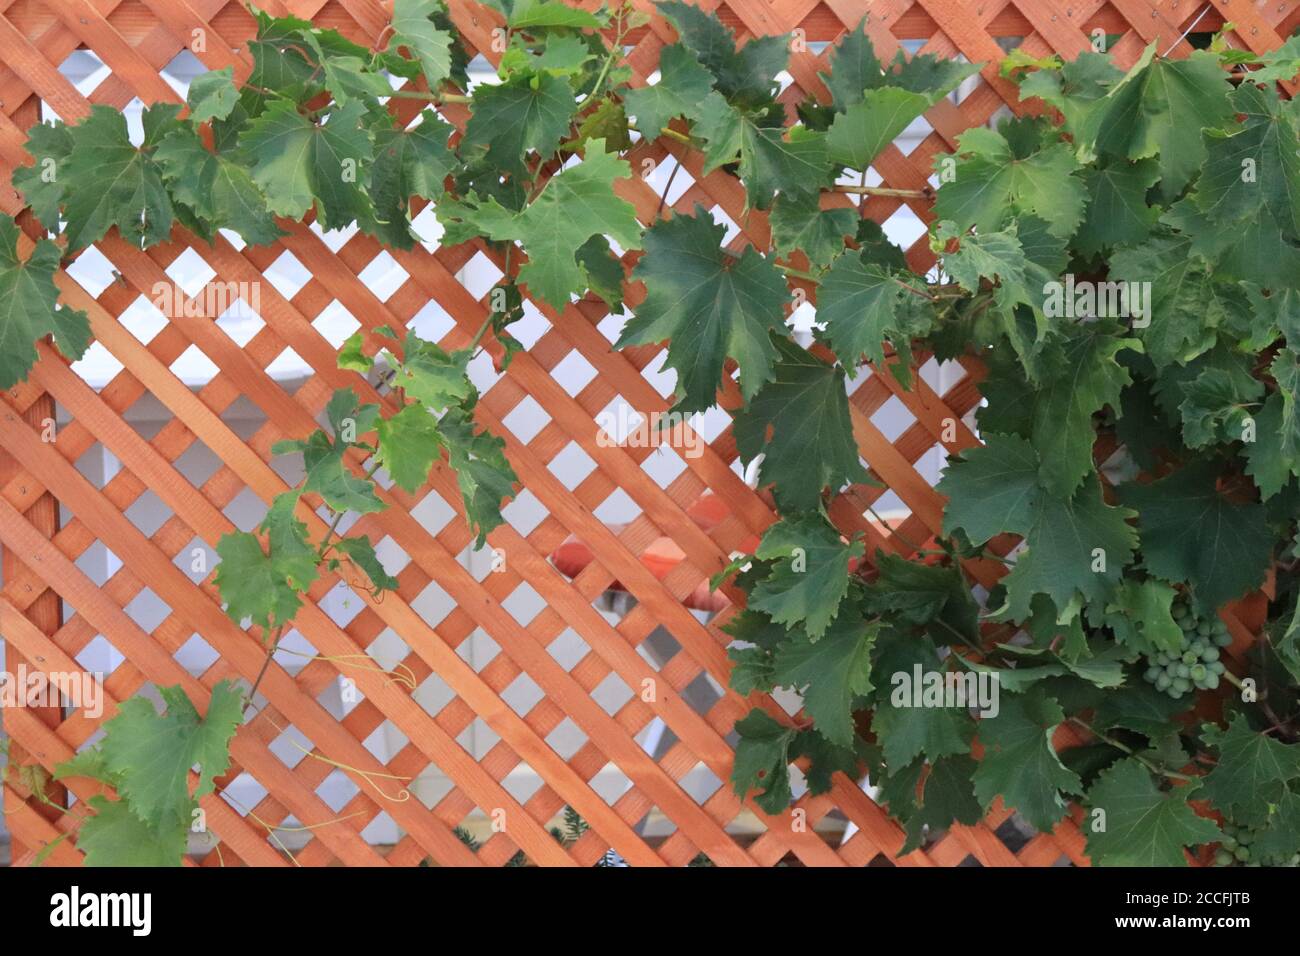 Healthy grapevine with white grapes climbing a wooden wall Stock Photo